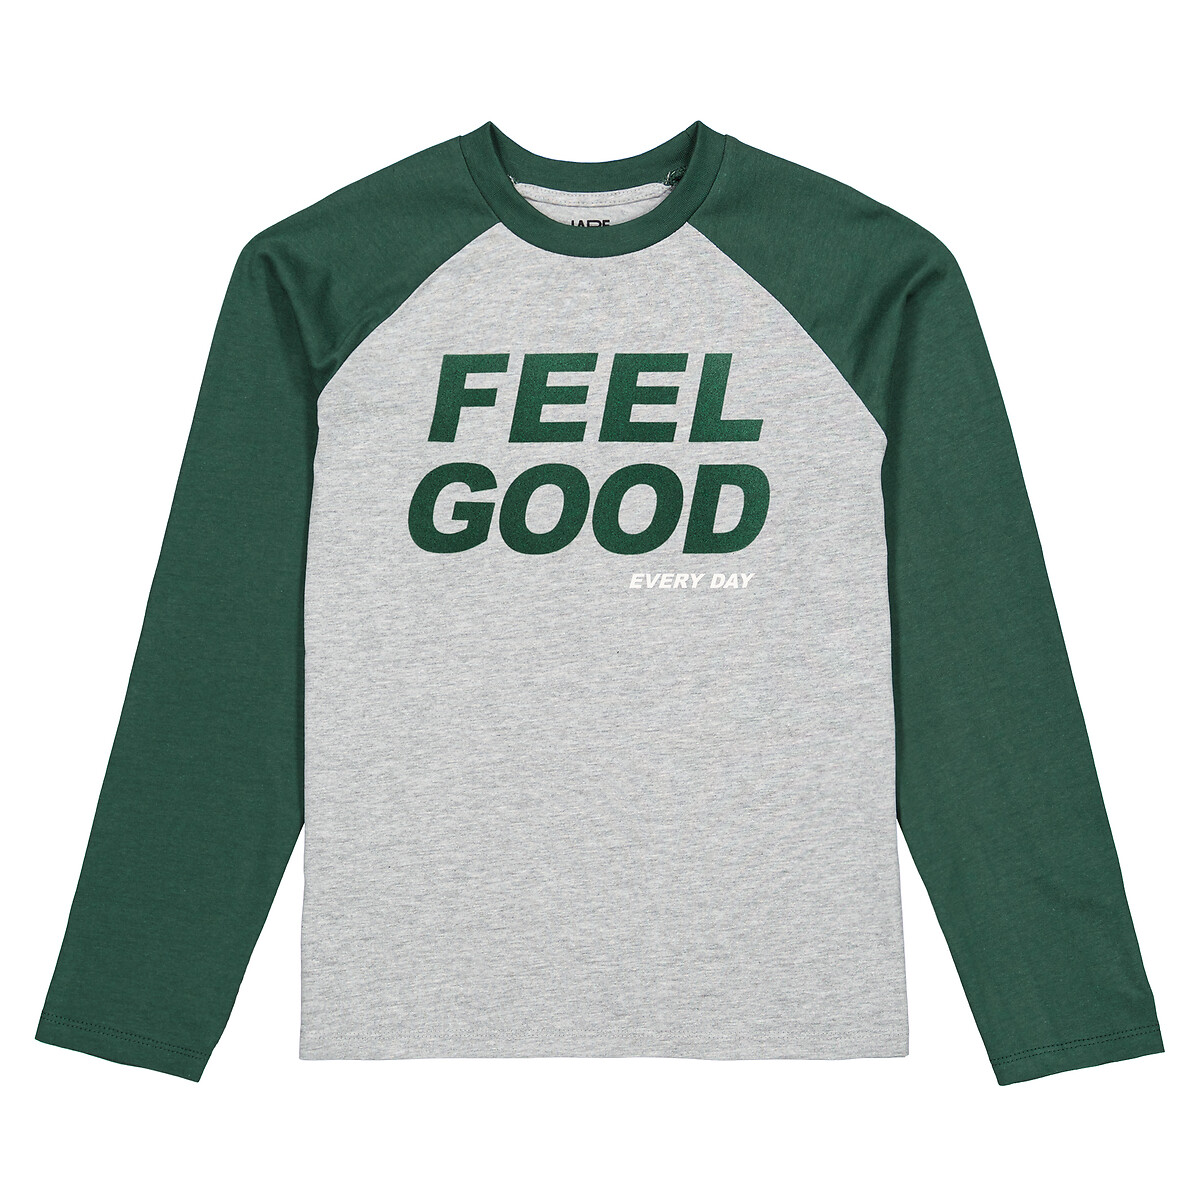 Slogan Print T-Shirt in Cotton Mix with Long Sleeves